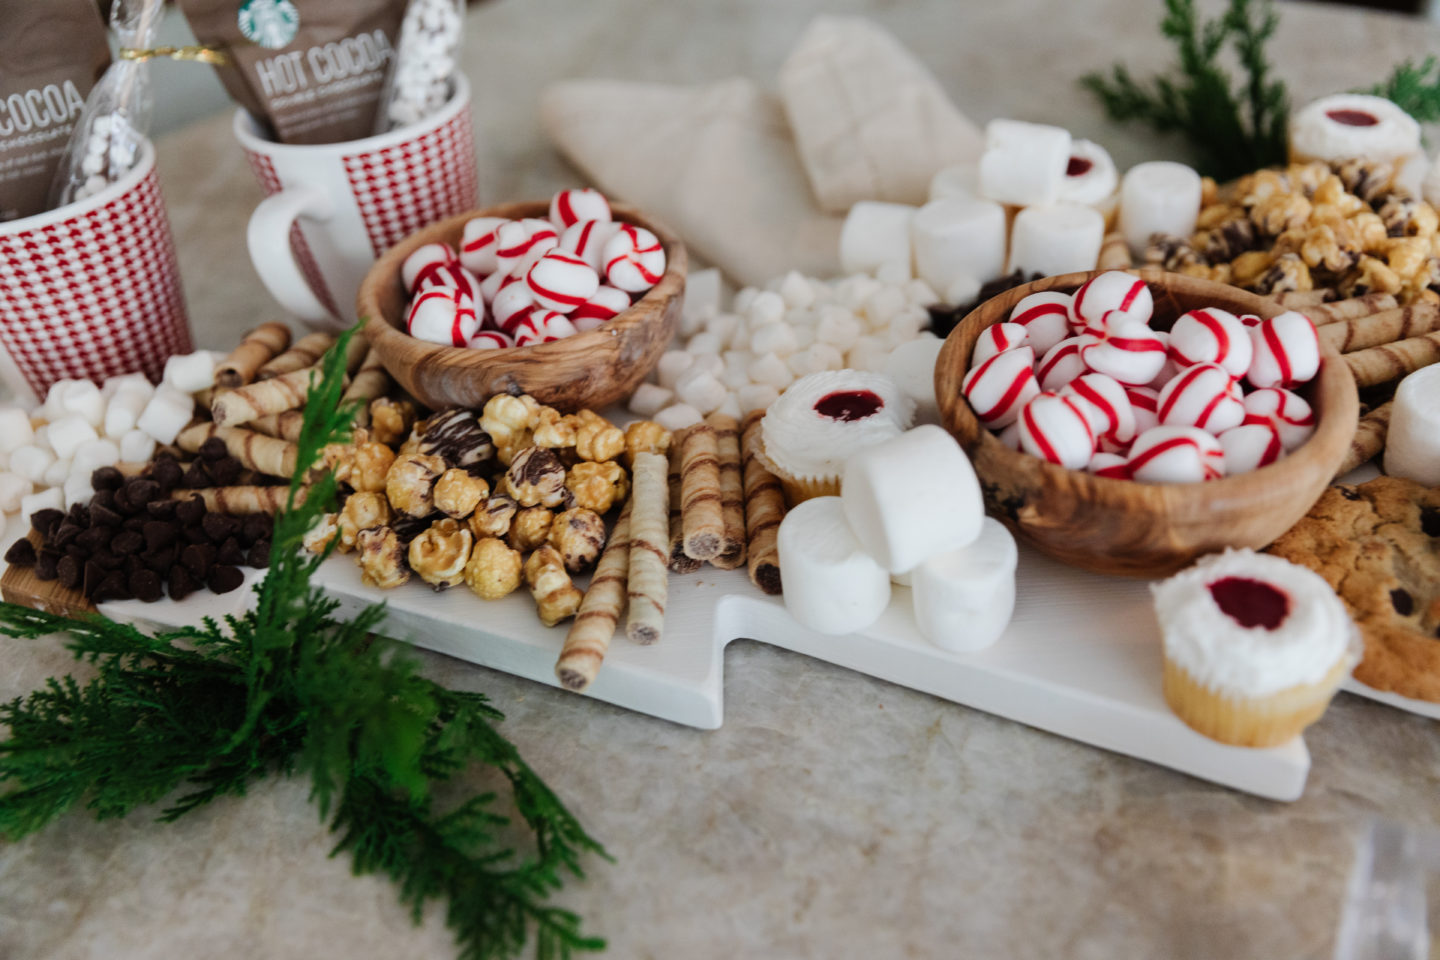 A Christmas tree charcuterie board covered in white and red desserts